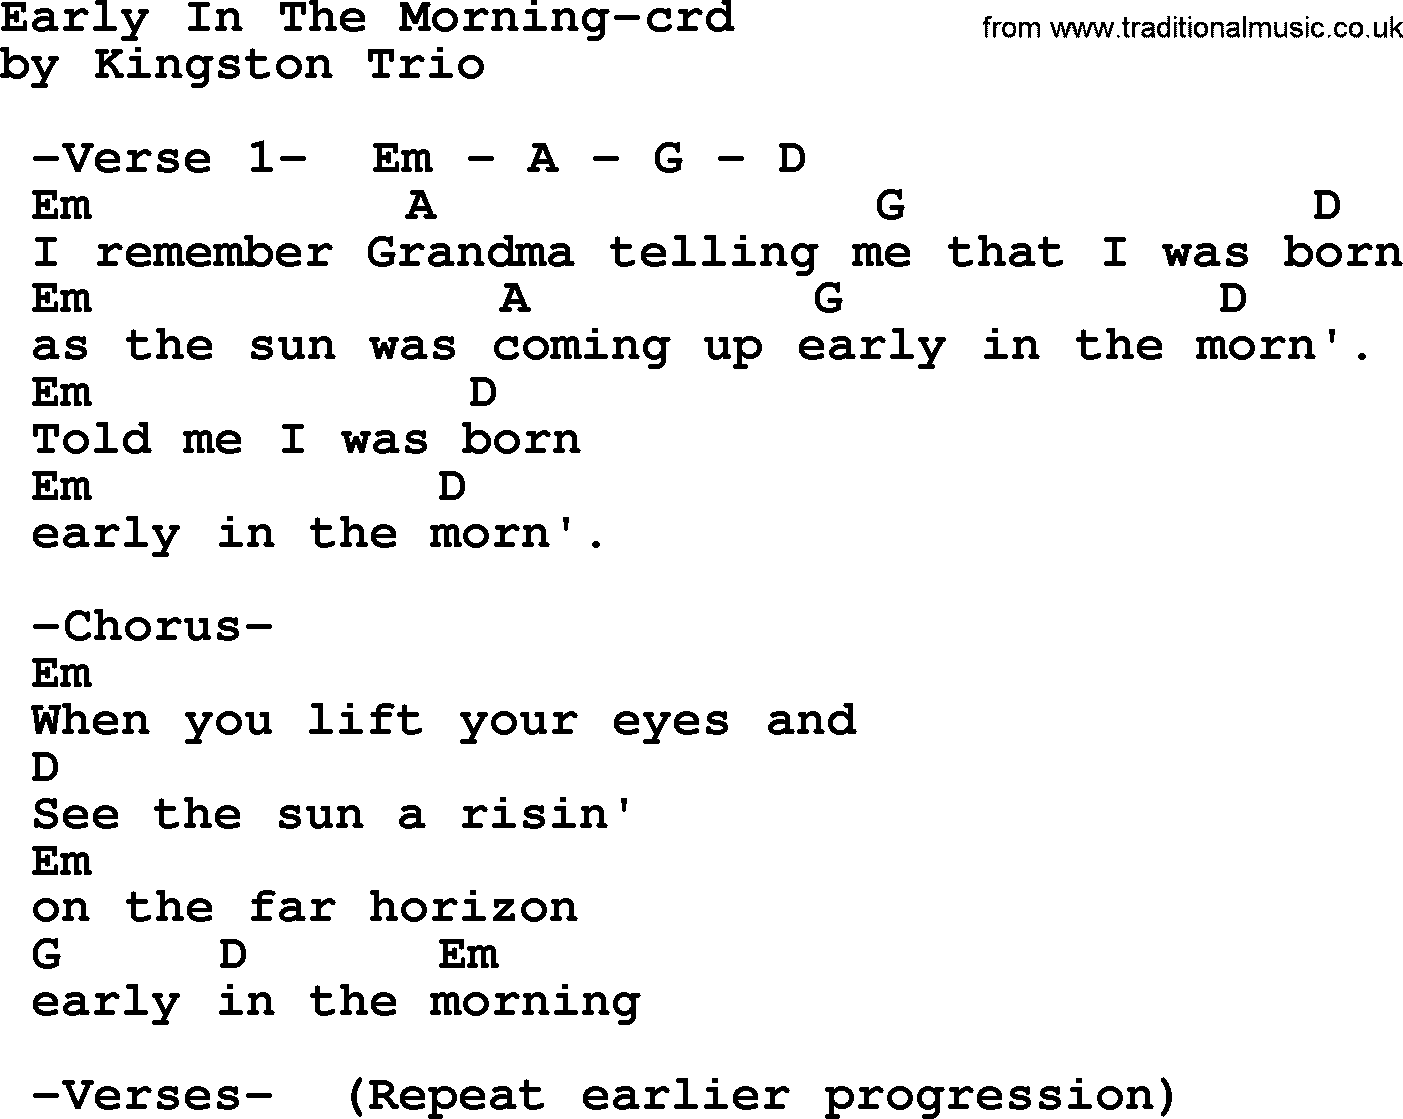 Kingston Trio song Early In The Morning, lyrics and chords